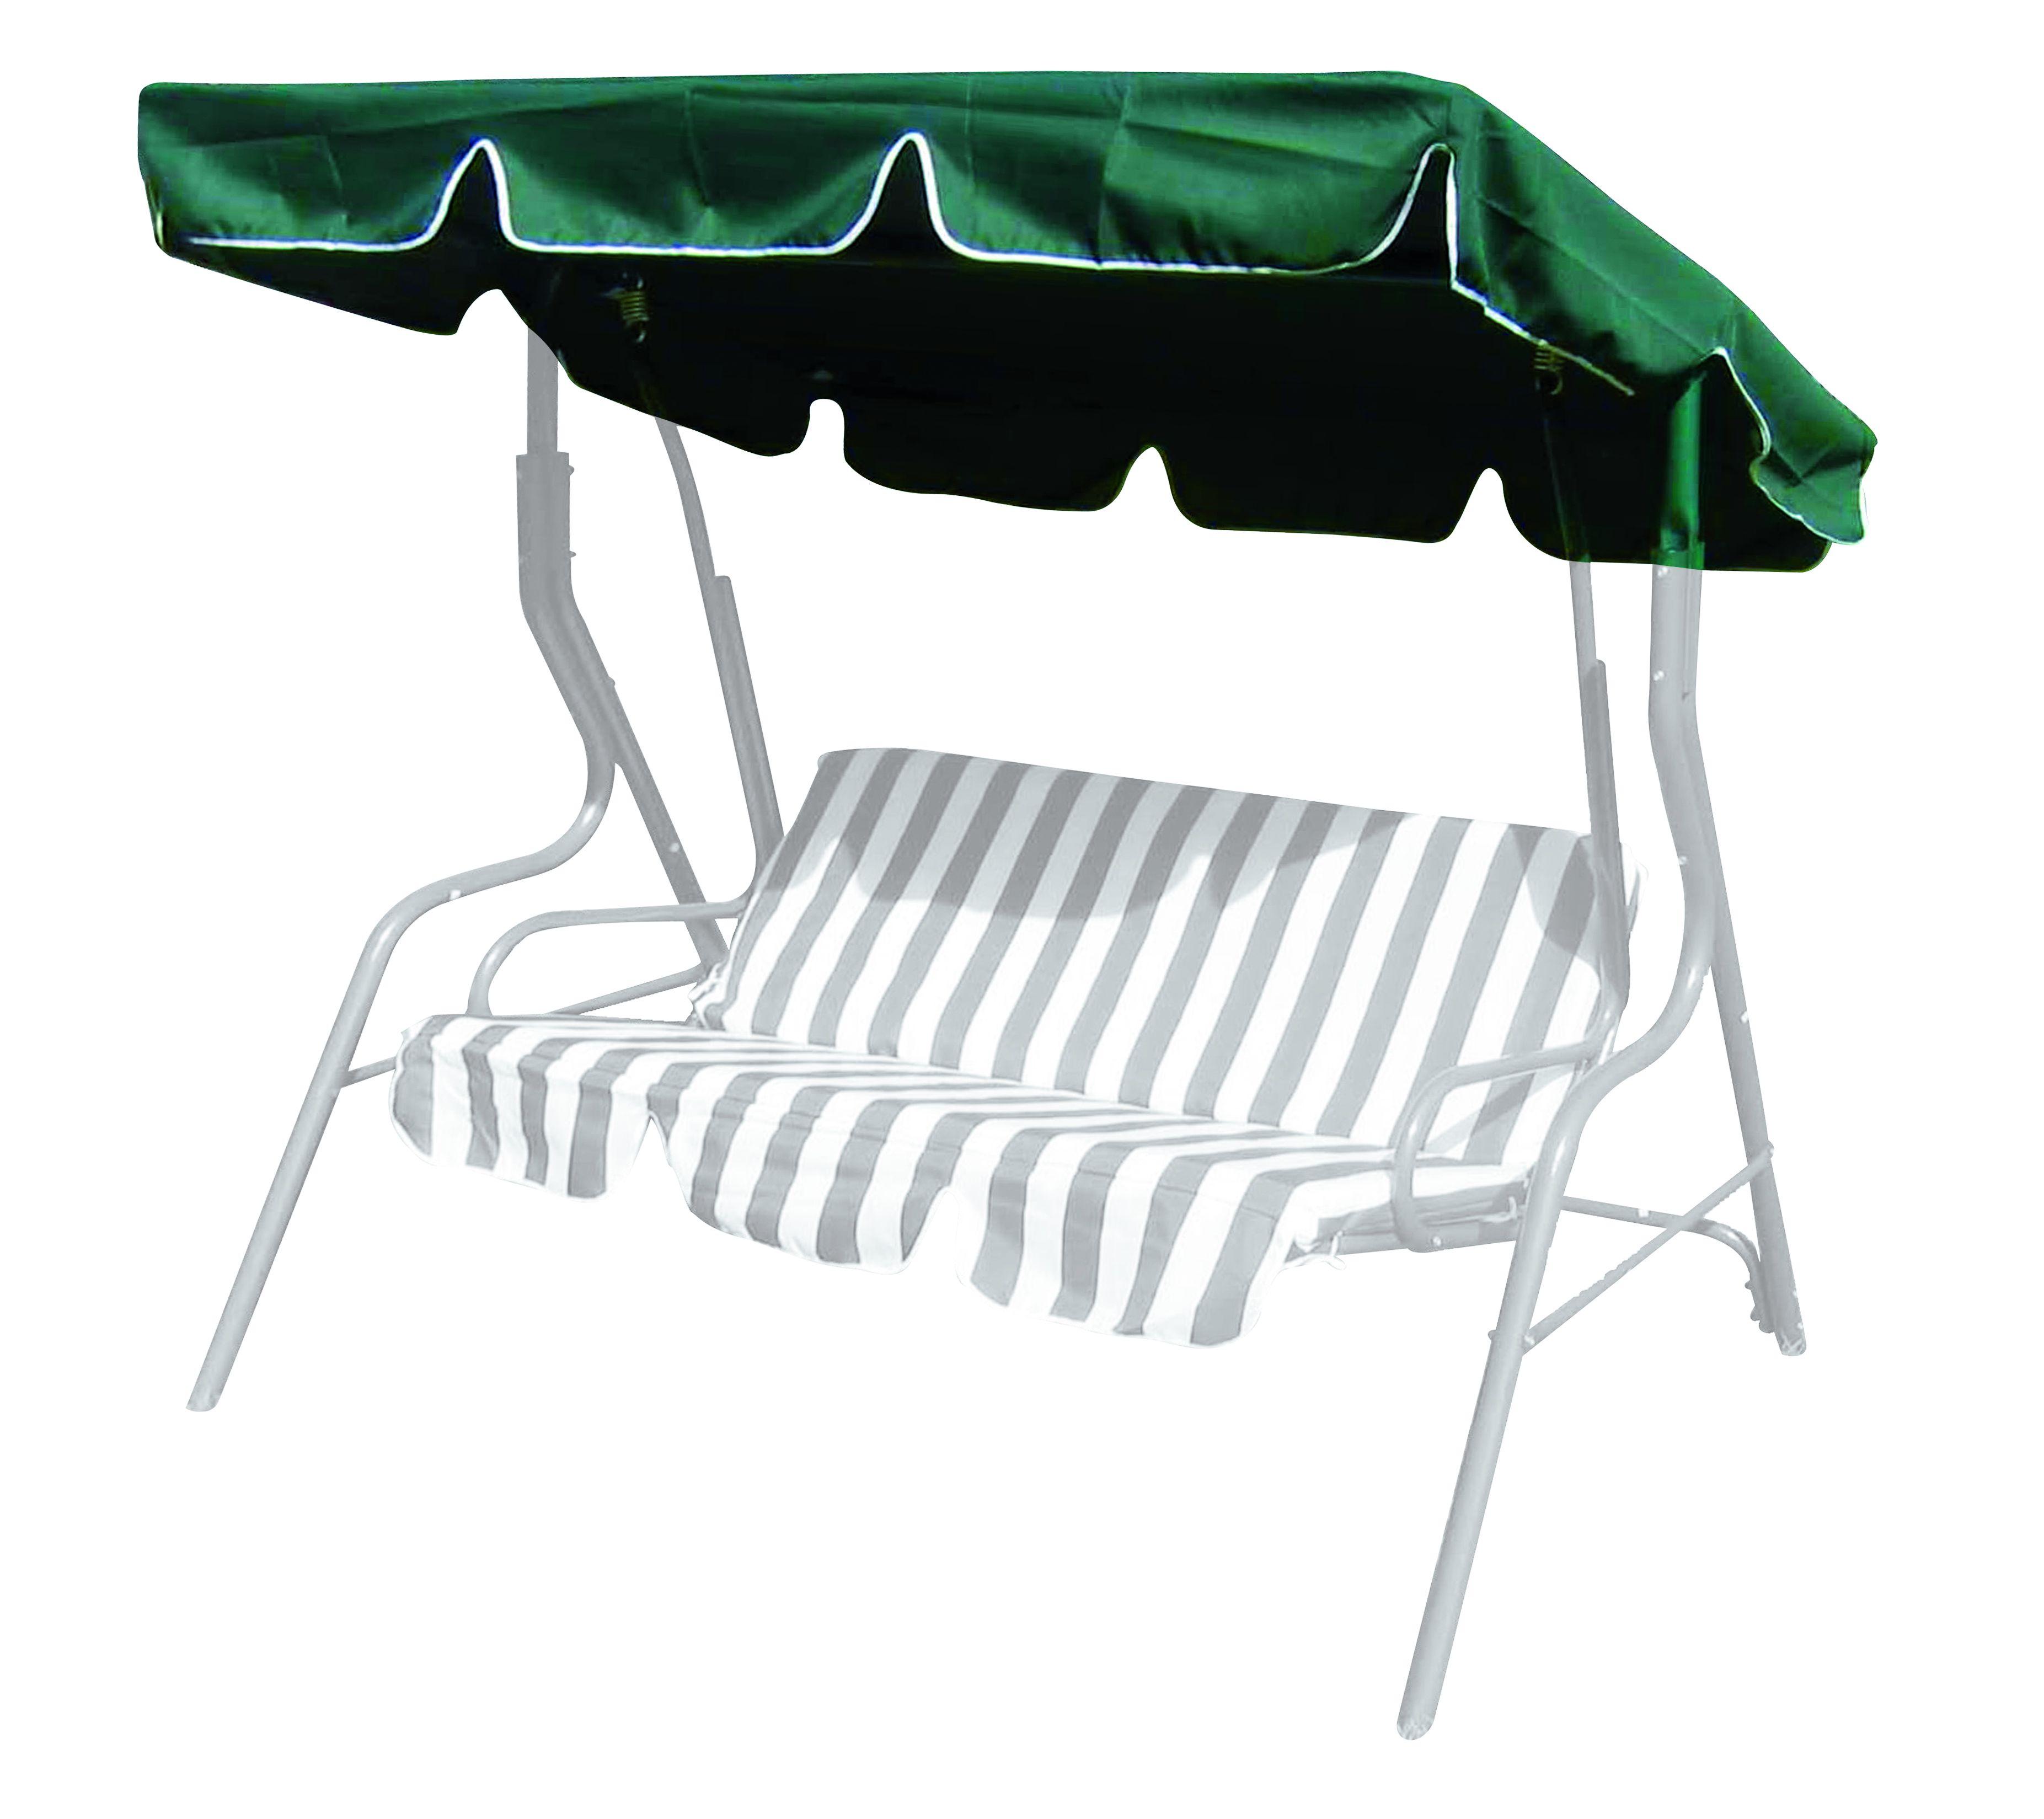 Roof canopy for a garden swing, 163x110 cm, green